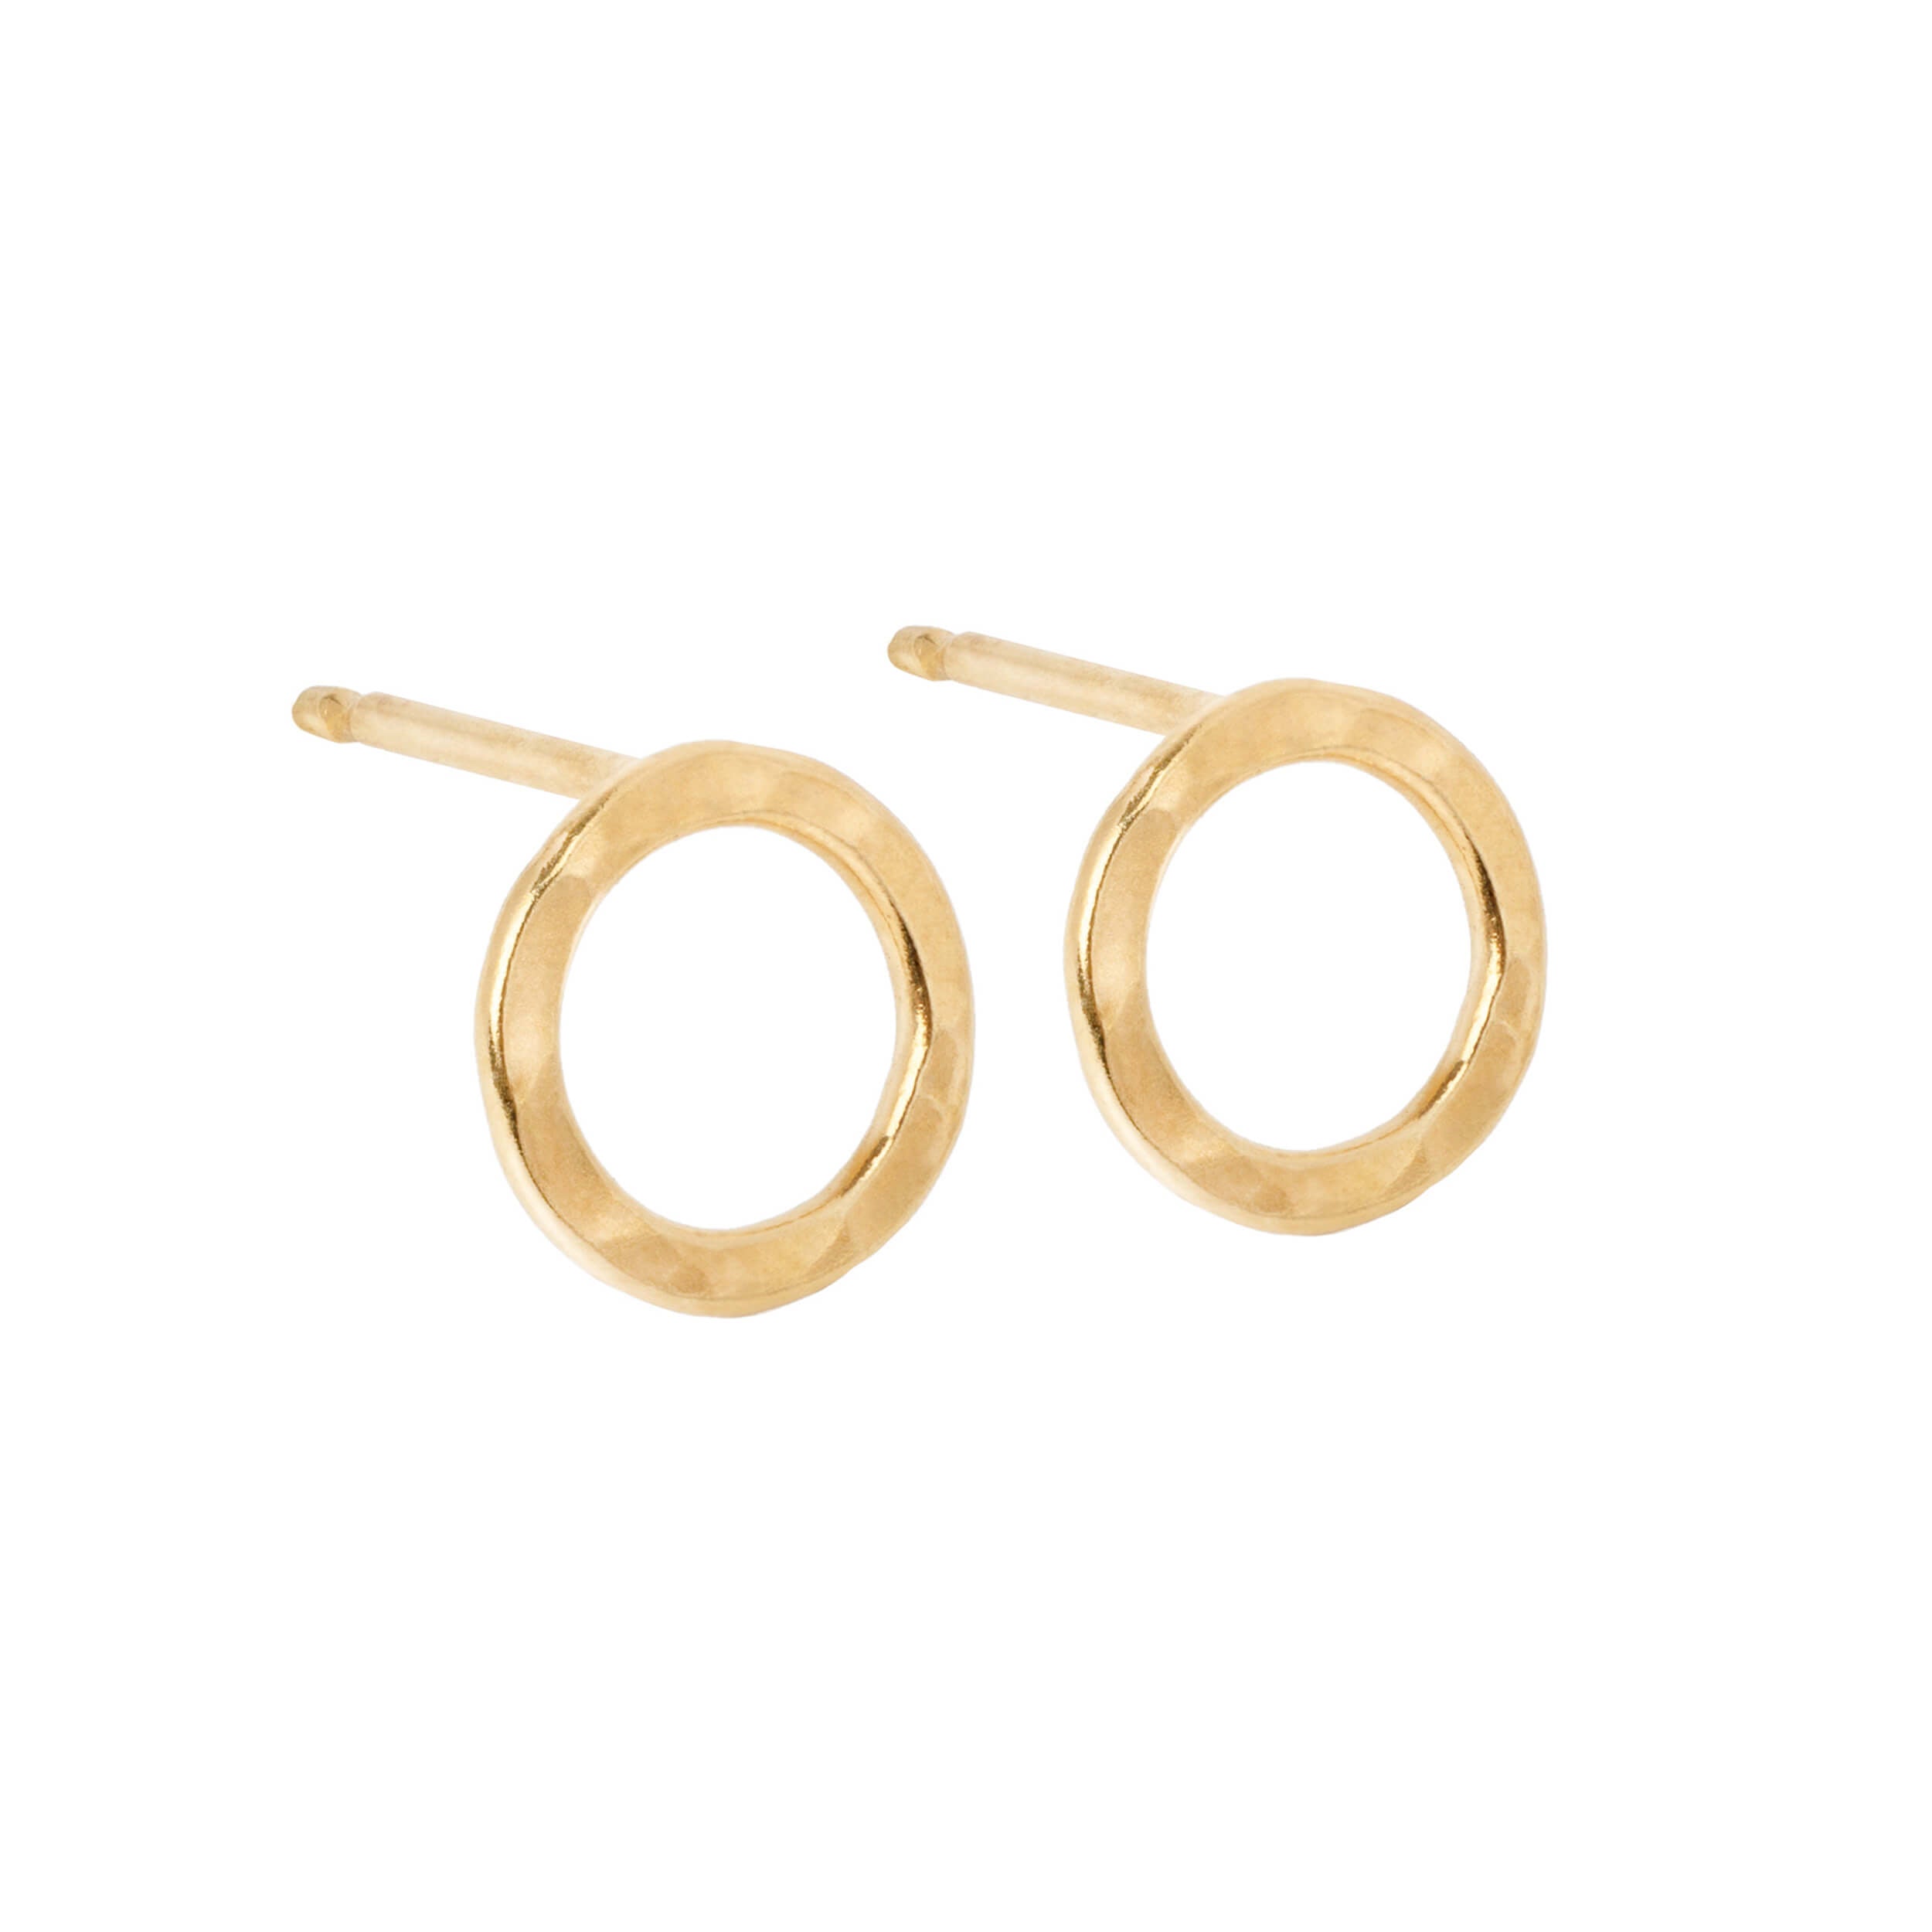 gold sheila studs, hammered gold circle studs, open circle studs, inifinity studs